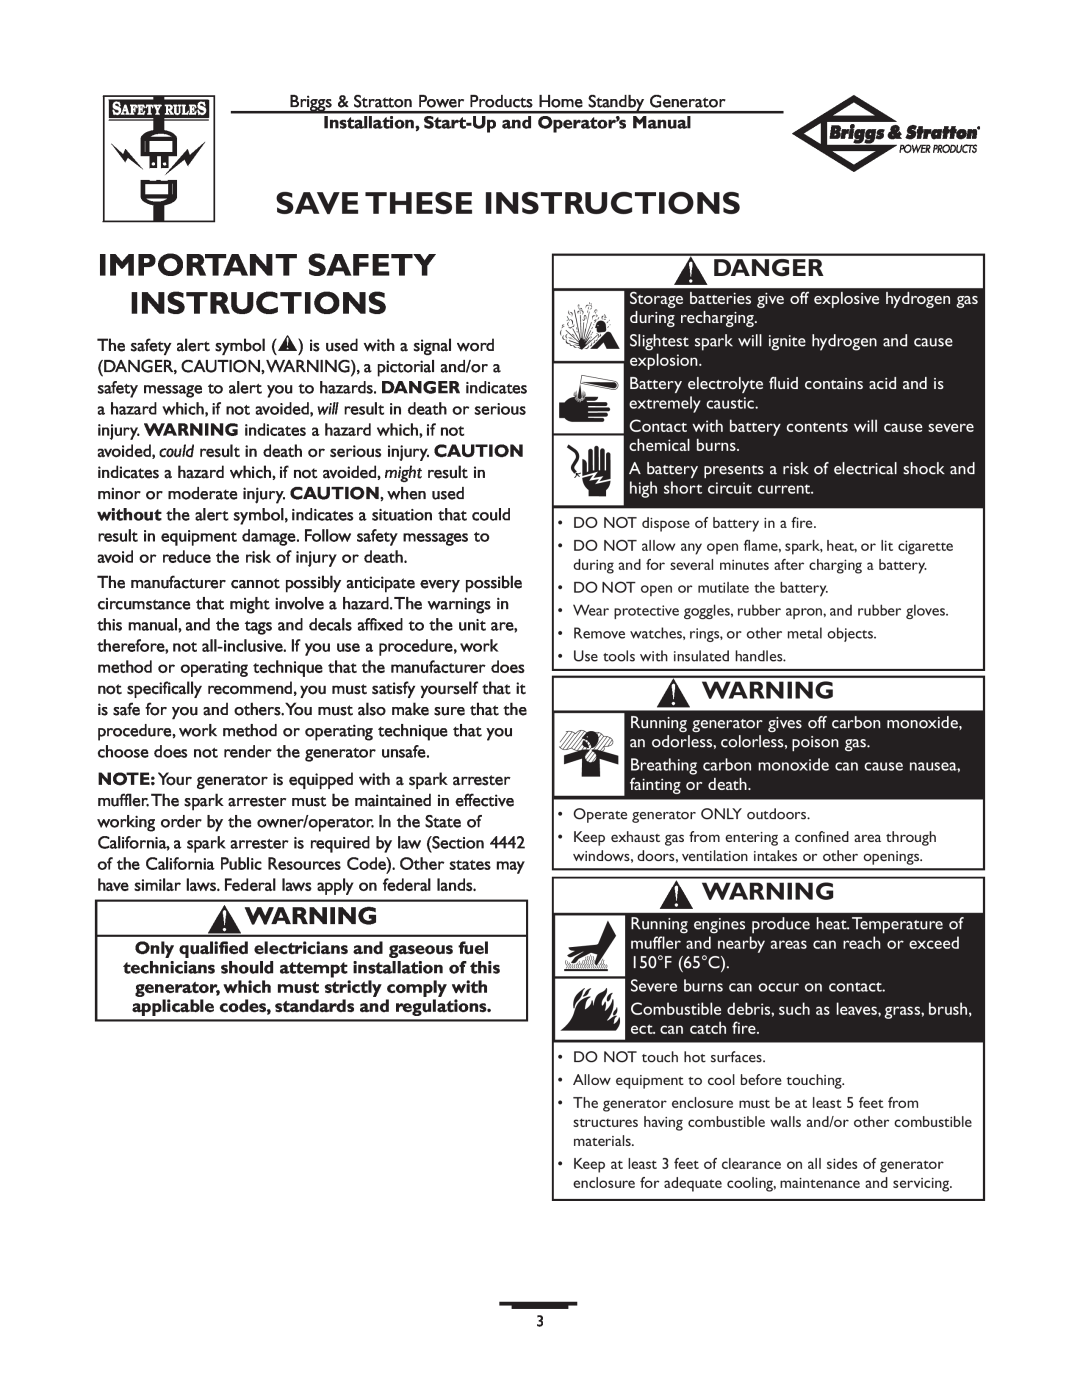 Briggs & Stratton 01897-0 manual Save These Instructions, Important Safety Instructions, Danger 